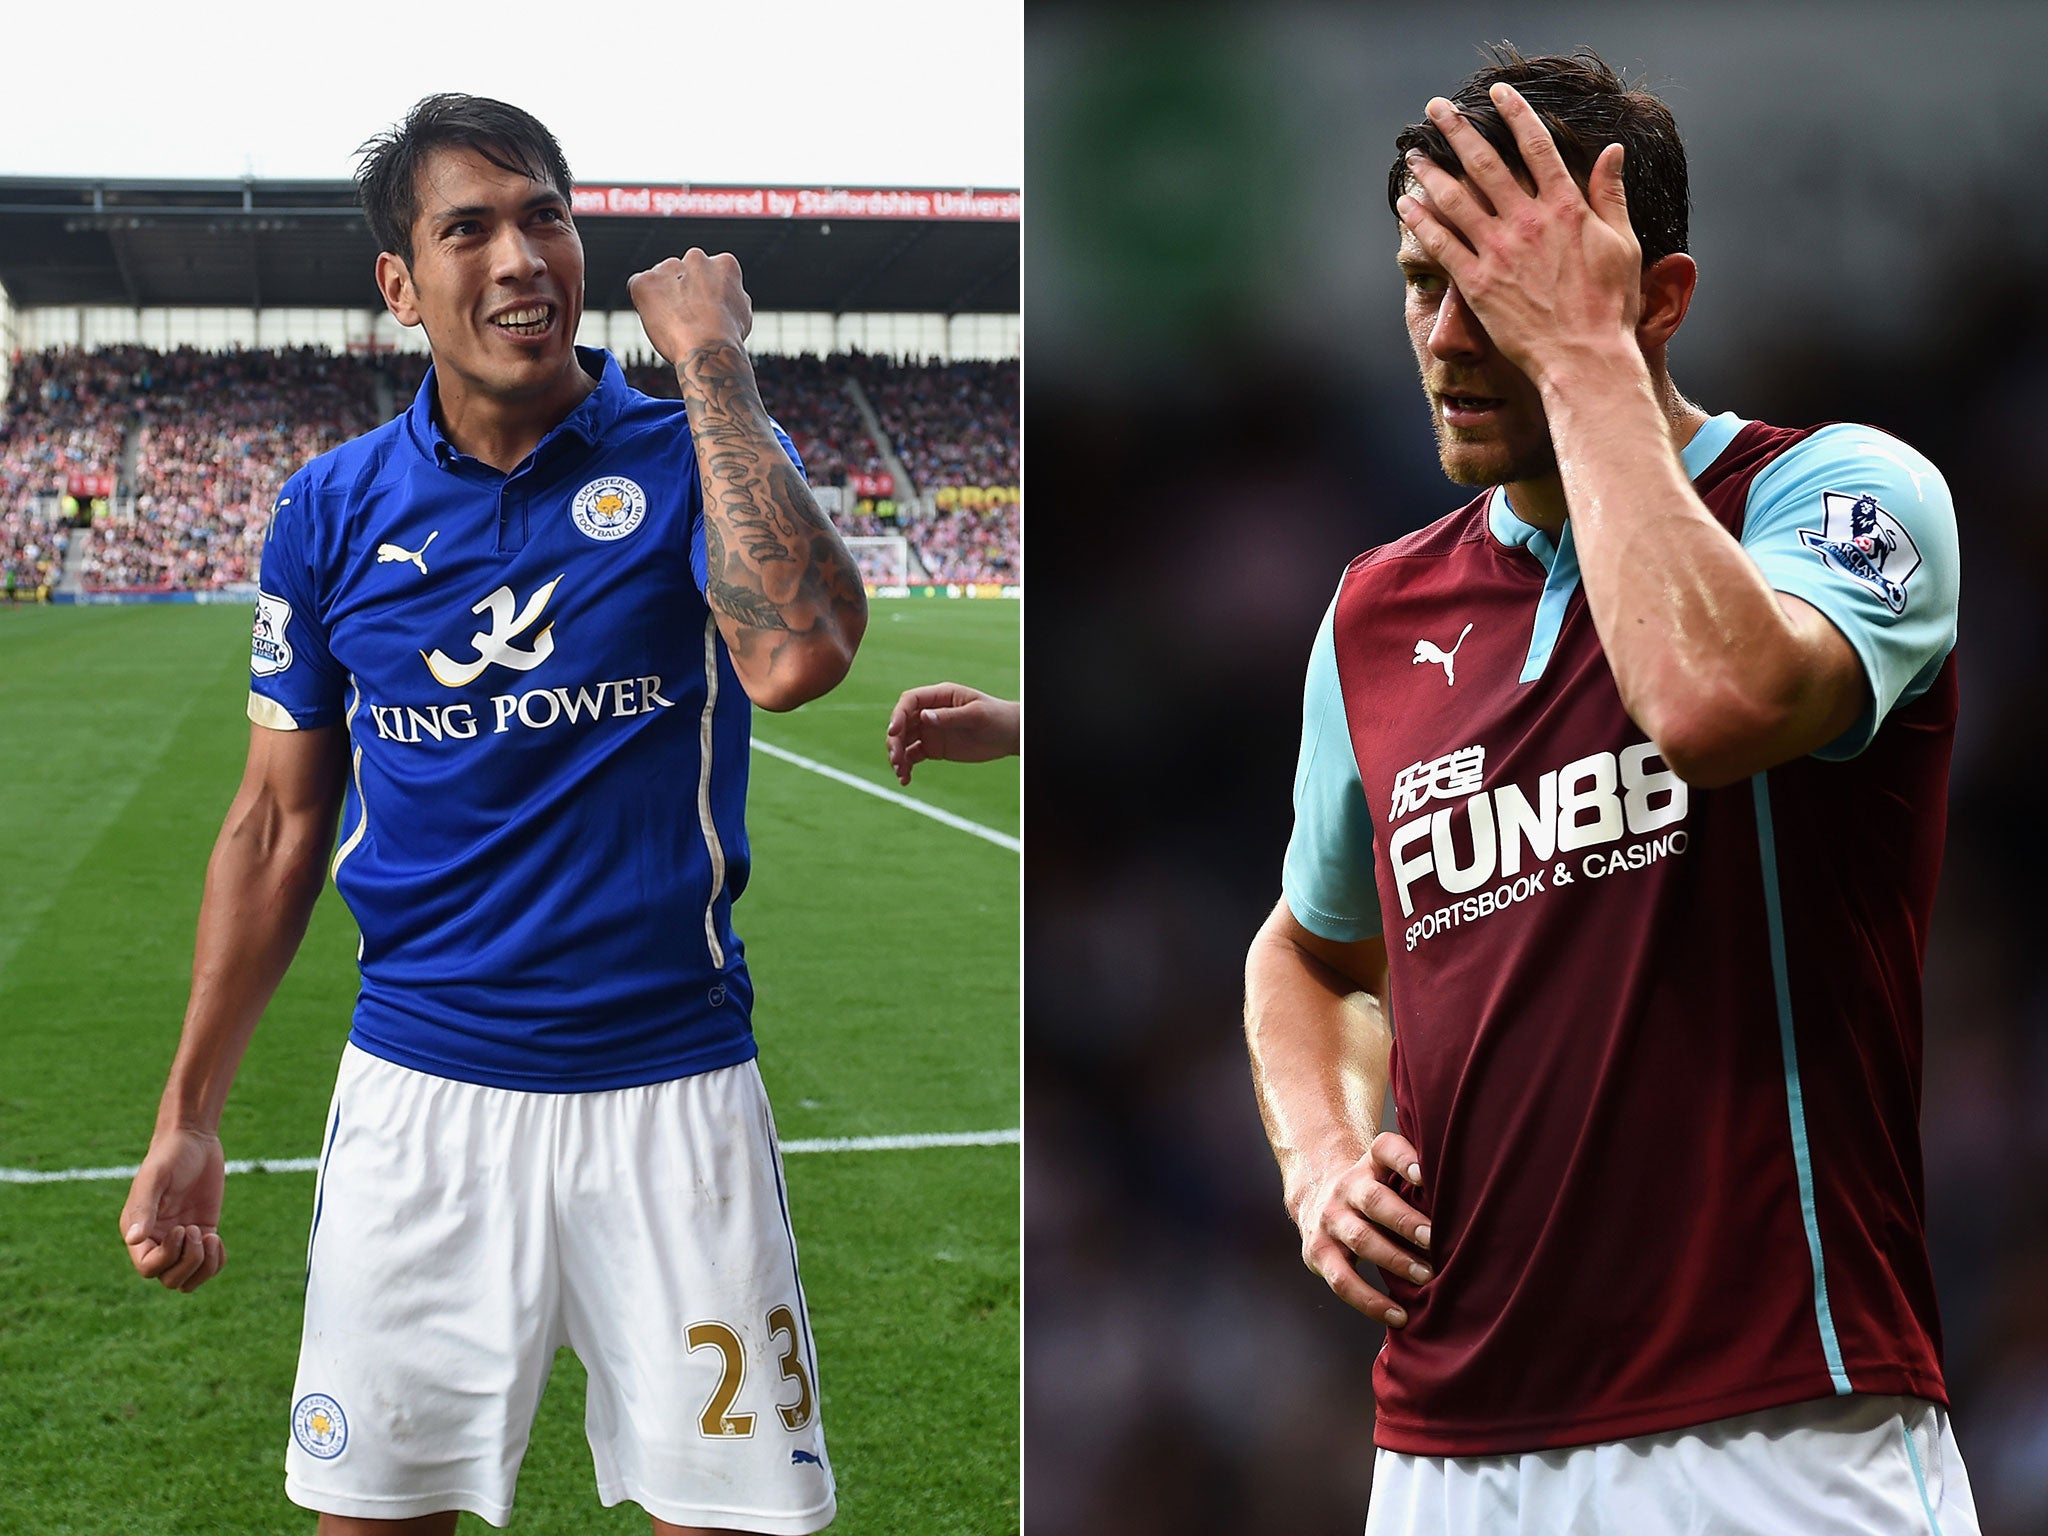 Leonardo Ulloa (far left) has excelled for Leicester this season while Burnley have missed the goals of Sam Vokes and the likes of Lukas Jutkiewicz (right) have failed to find the net